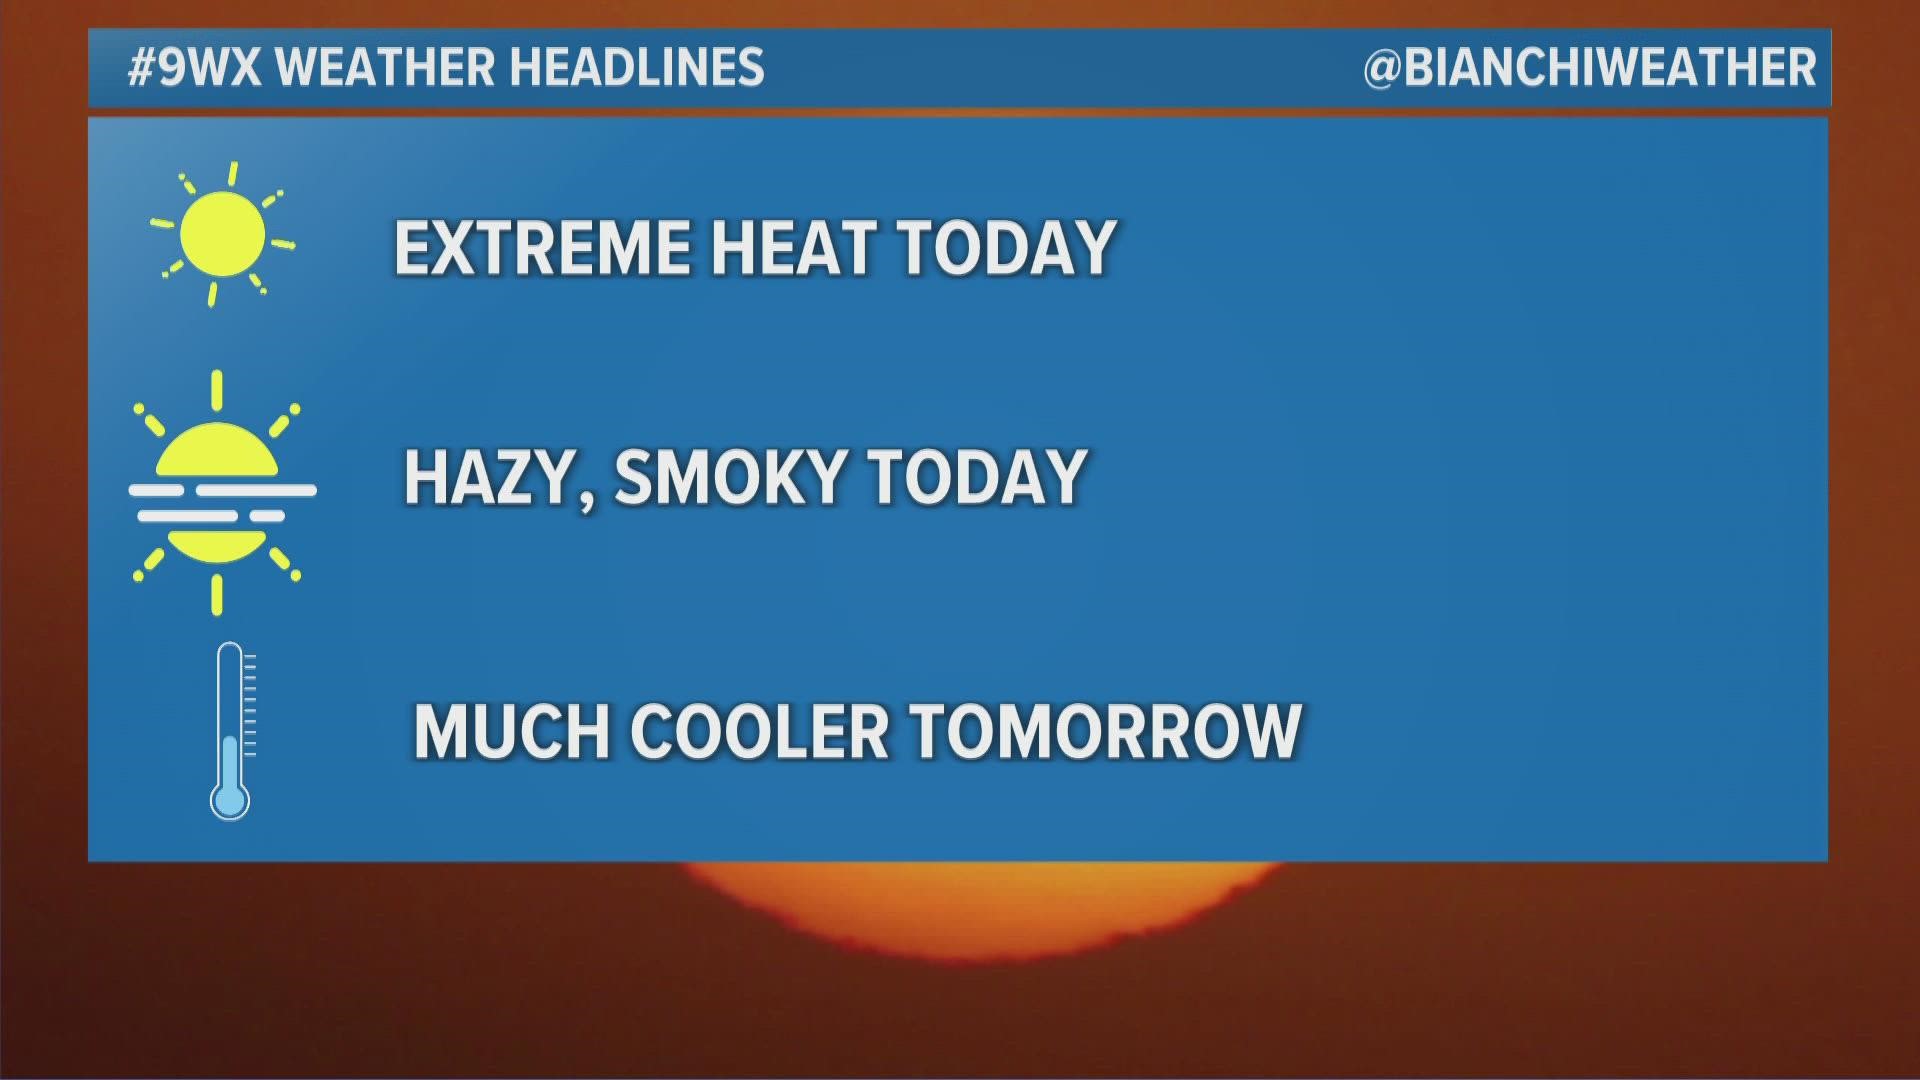 Along with the haze, it’ll be a hot and breezy Monday across the Denver metro area. Meteorologist Chris Bianchi has more details on your Colorado forecast.